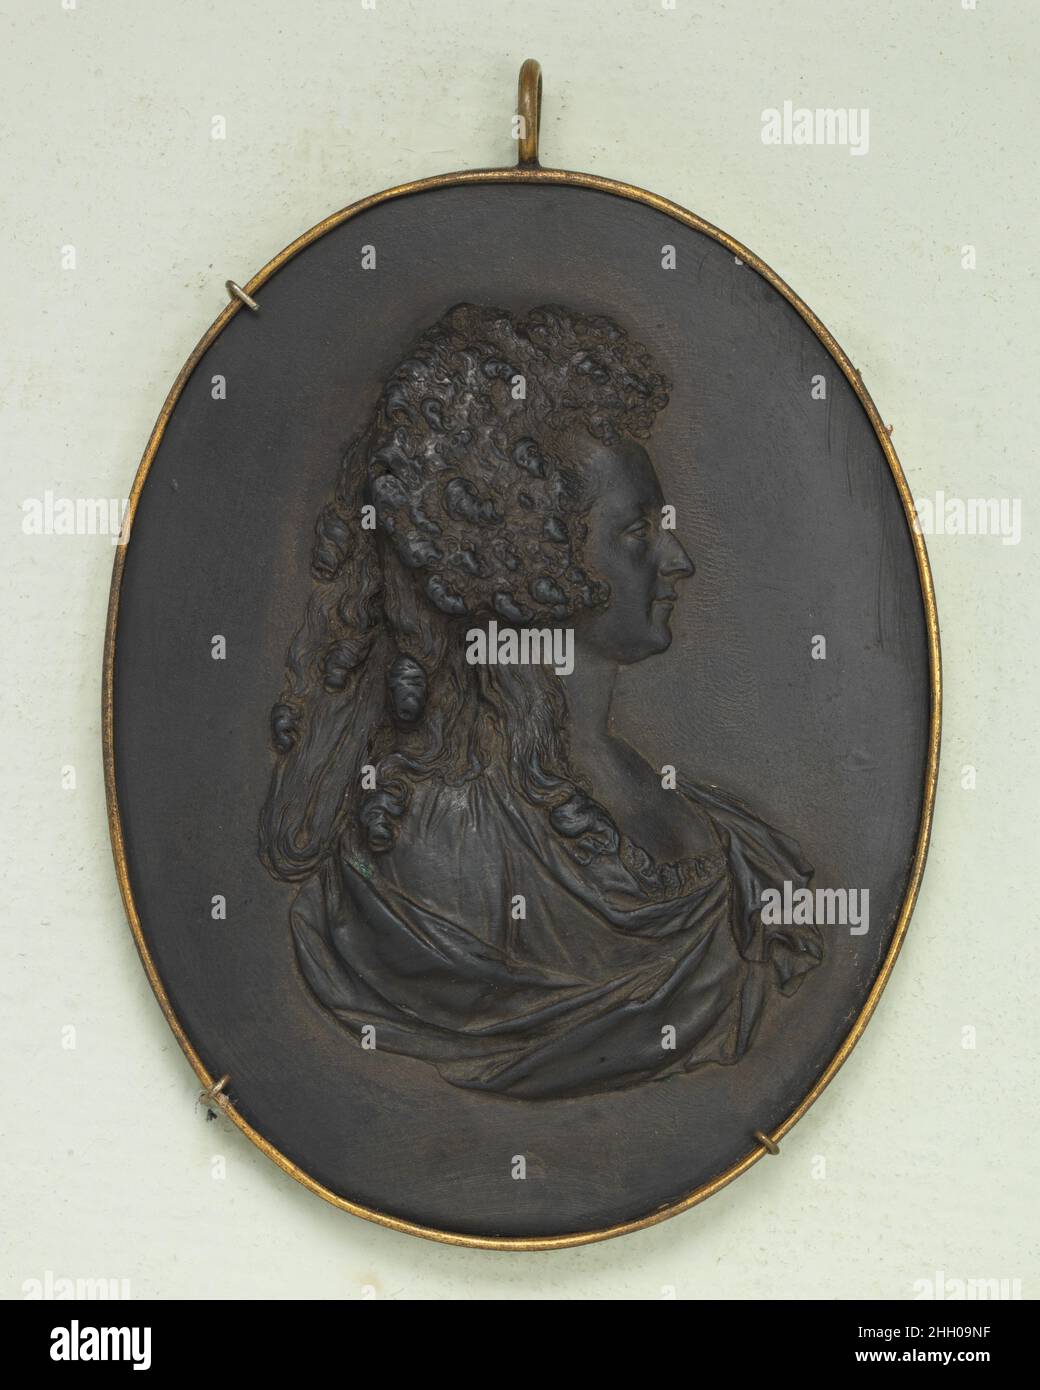 Mary Elizabeth Nugent, Marchioness of Buckingham late 18th century Josiah Wedgwood British Cameo medallions with portrait reliefs were made by Josiah Wedgwood between 1765 and 1795, with Thomas Bentley as his partner from 1769 to 1780. Black basalt and jasper are both types of fine stoneware hard enough for the delicate modeling which distinguishes Wedgwood's portrait cameos of 'Illustious Ancents and Moderns.'. Mary Elizabeth Nugent, Marchioness of Buckingham. Josiah Wedgwood (British, Burslem, Stoke-on-Trent 1730–1795 Burslem, Stoke-on-Trent). British, Etruria, Staffordshire. late 18th centu Stock Photo